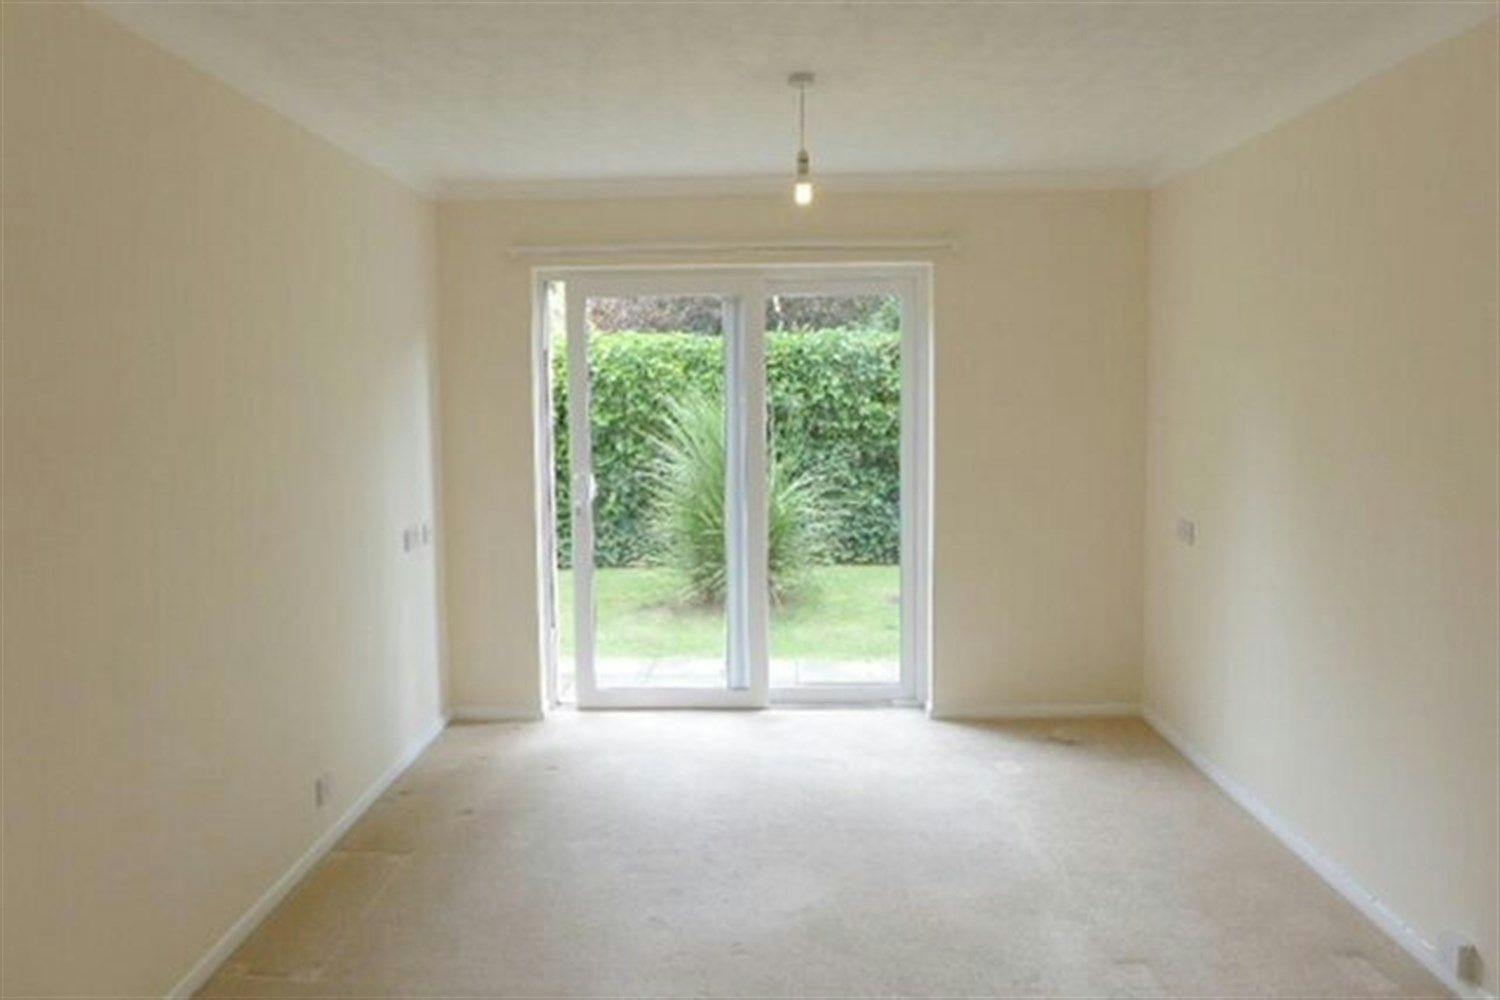 Living Room at Havenvale Retirement Apartment in Clacton-on-Sea, Essex